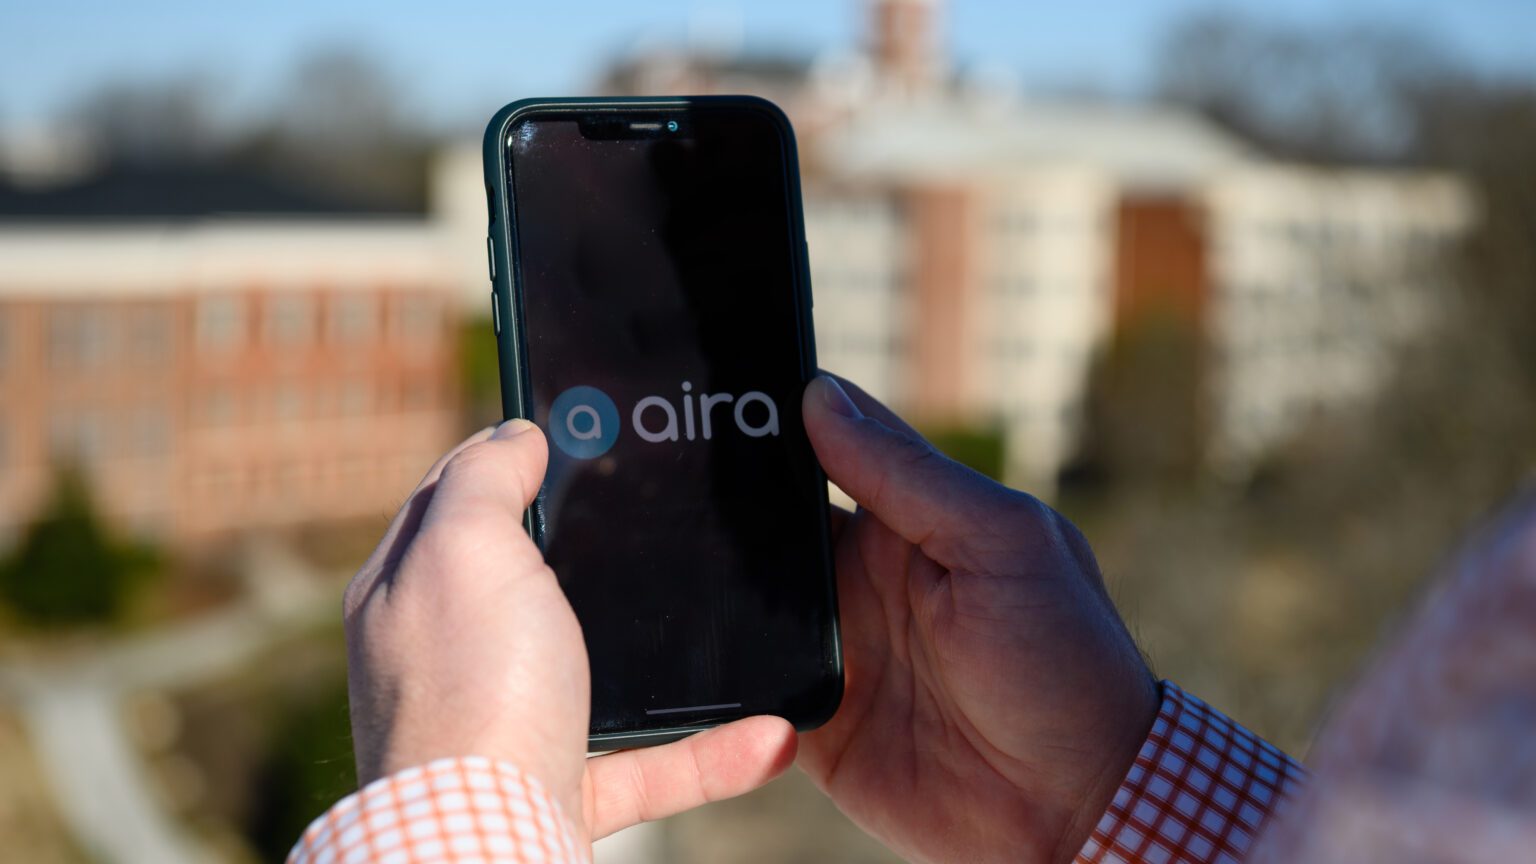 Person holding a smartphone with the Aira logo on the screen.